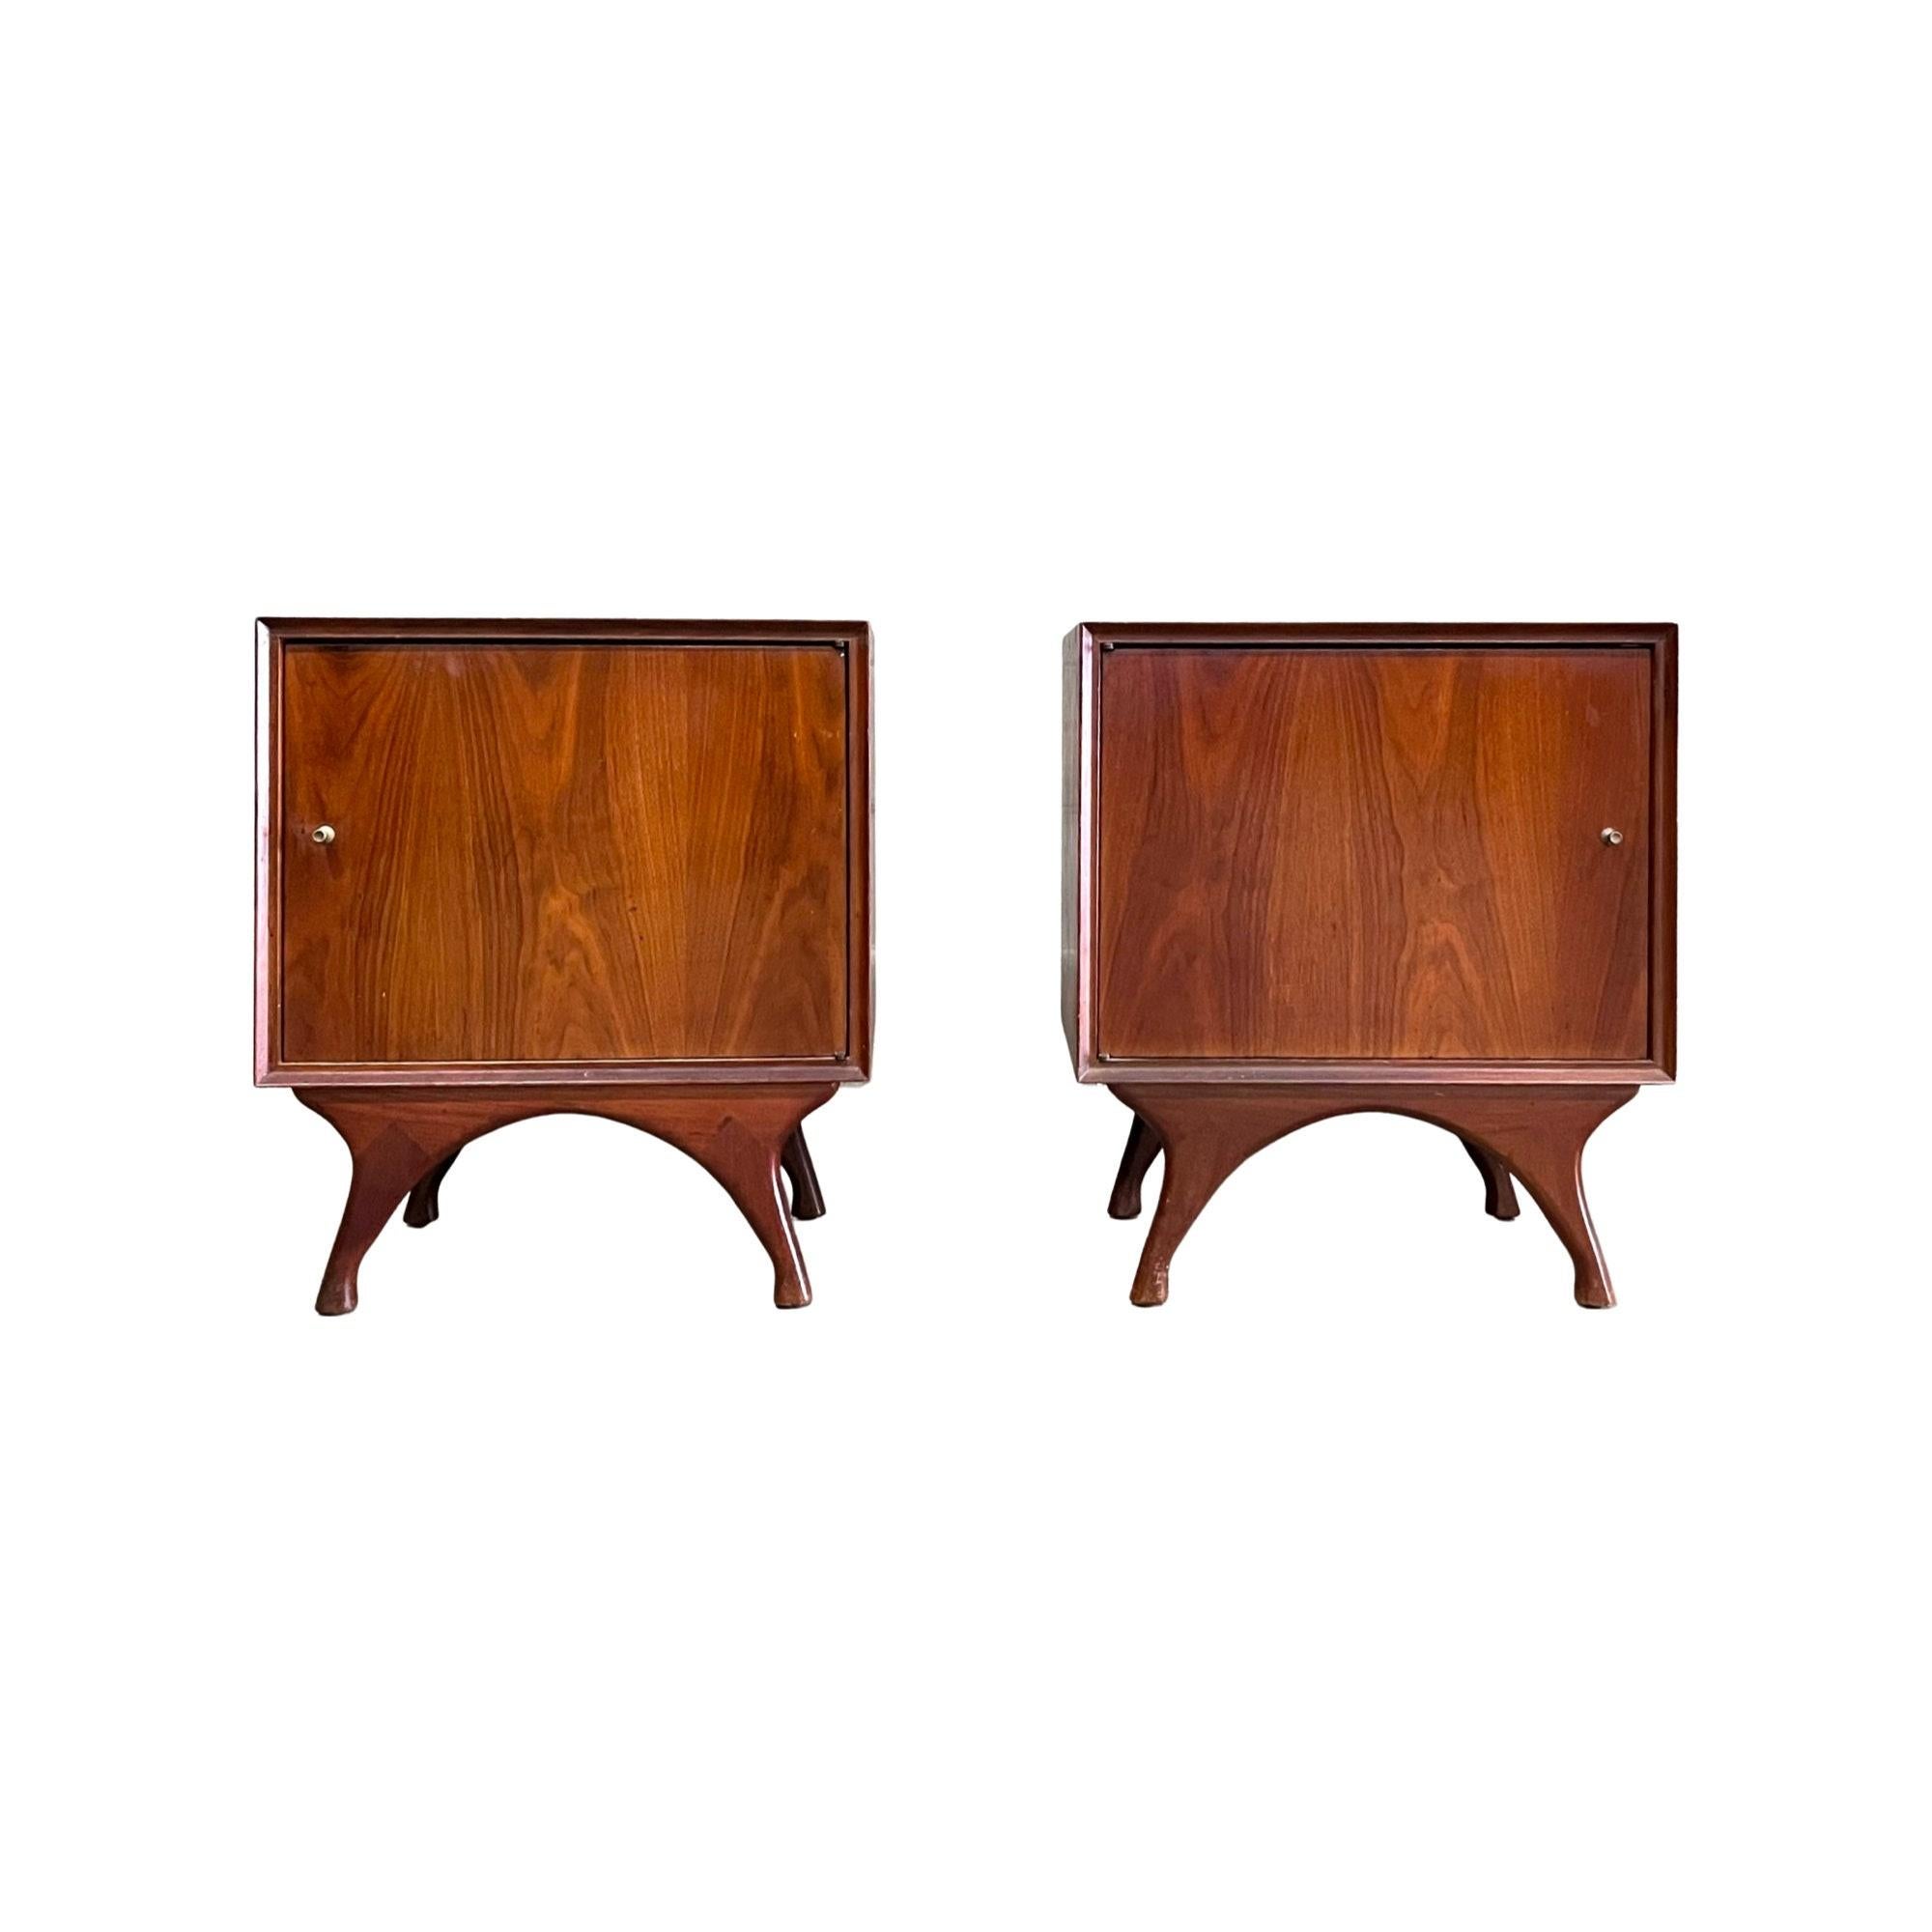 Mid-Century Modern Sculpted and Minimalist Vintage Mid Century Modern Pair of Nightstands c. 1960s For Sale